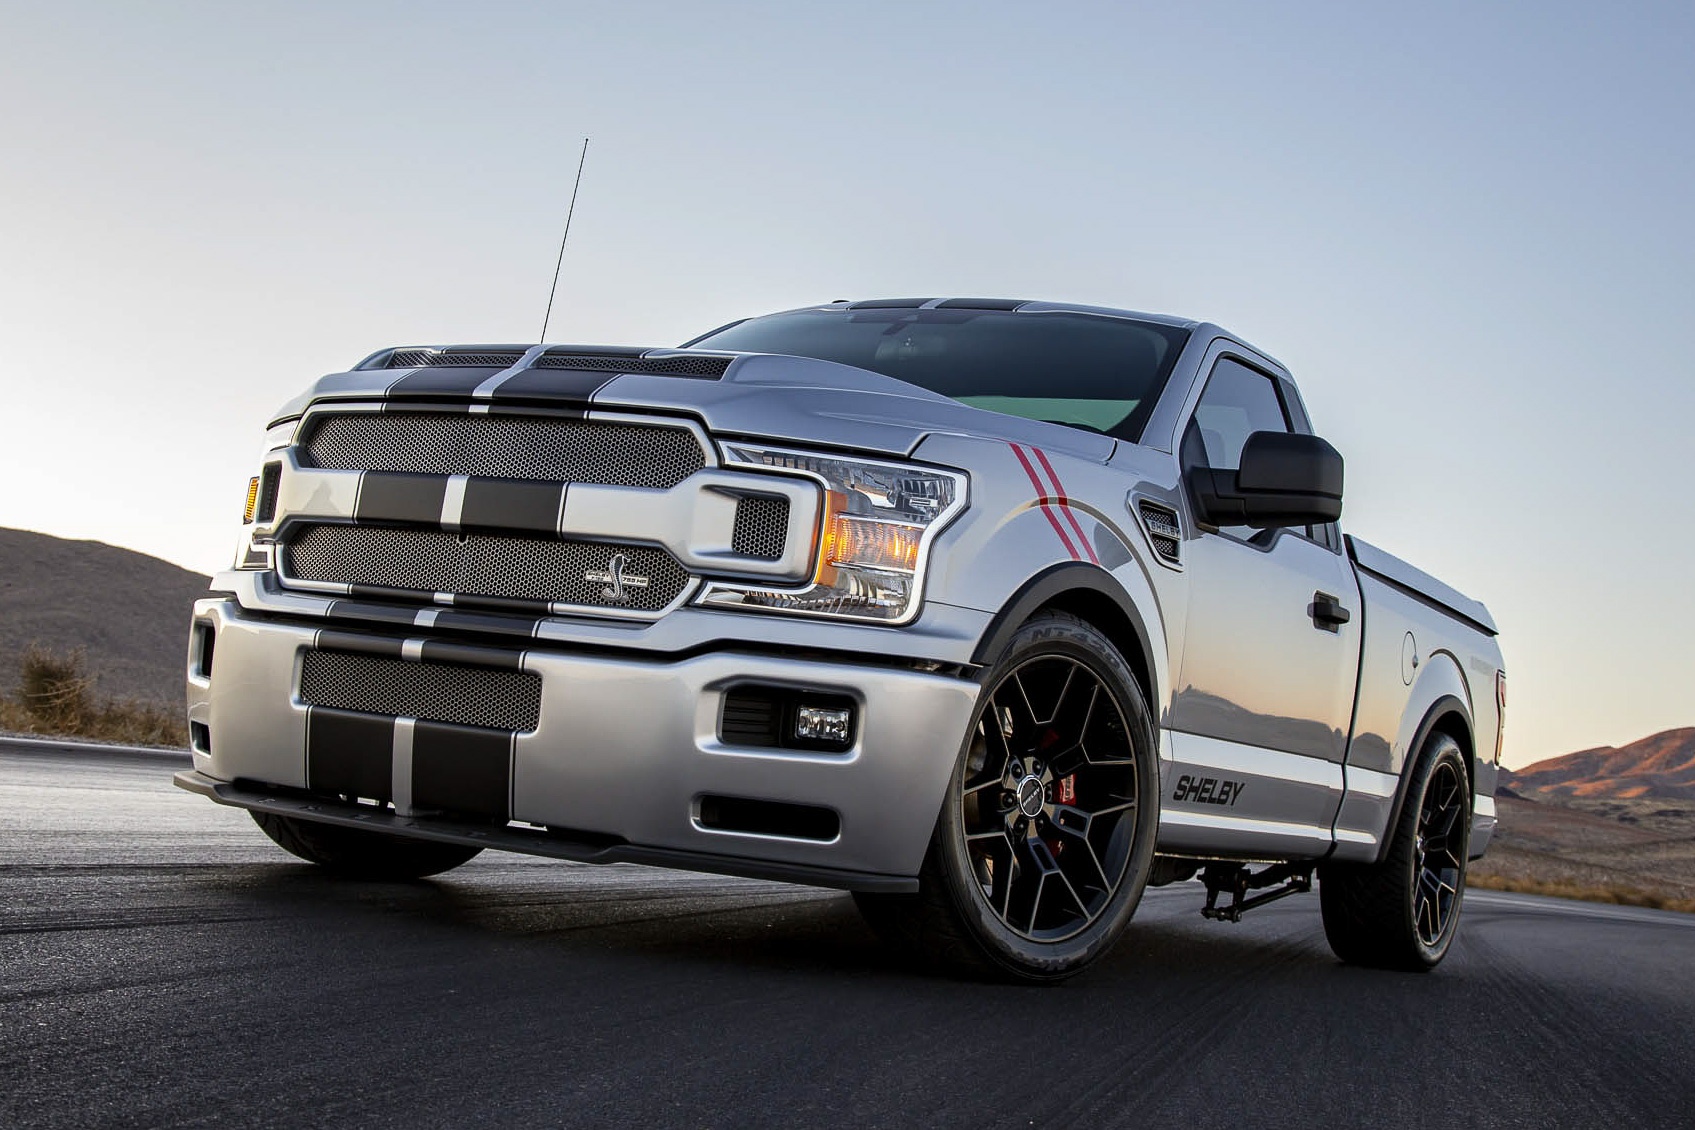 SHELBY F-150 Super Snake Sport coming to Australia